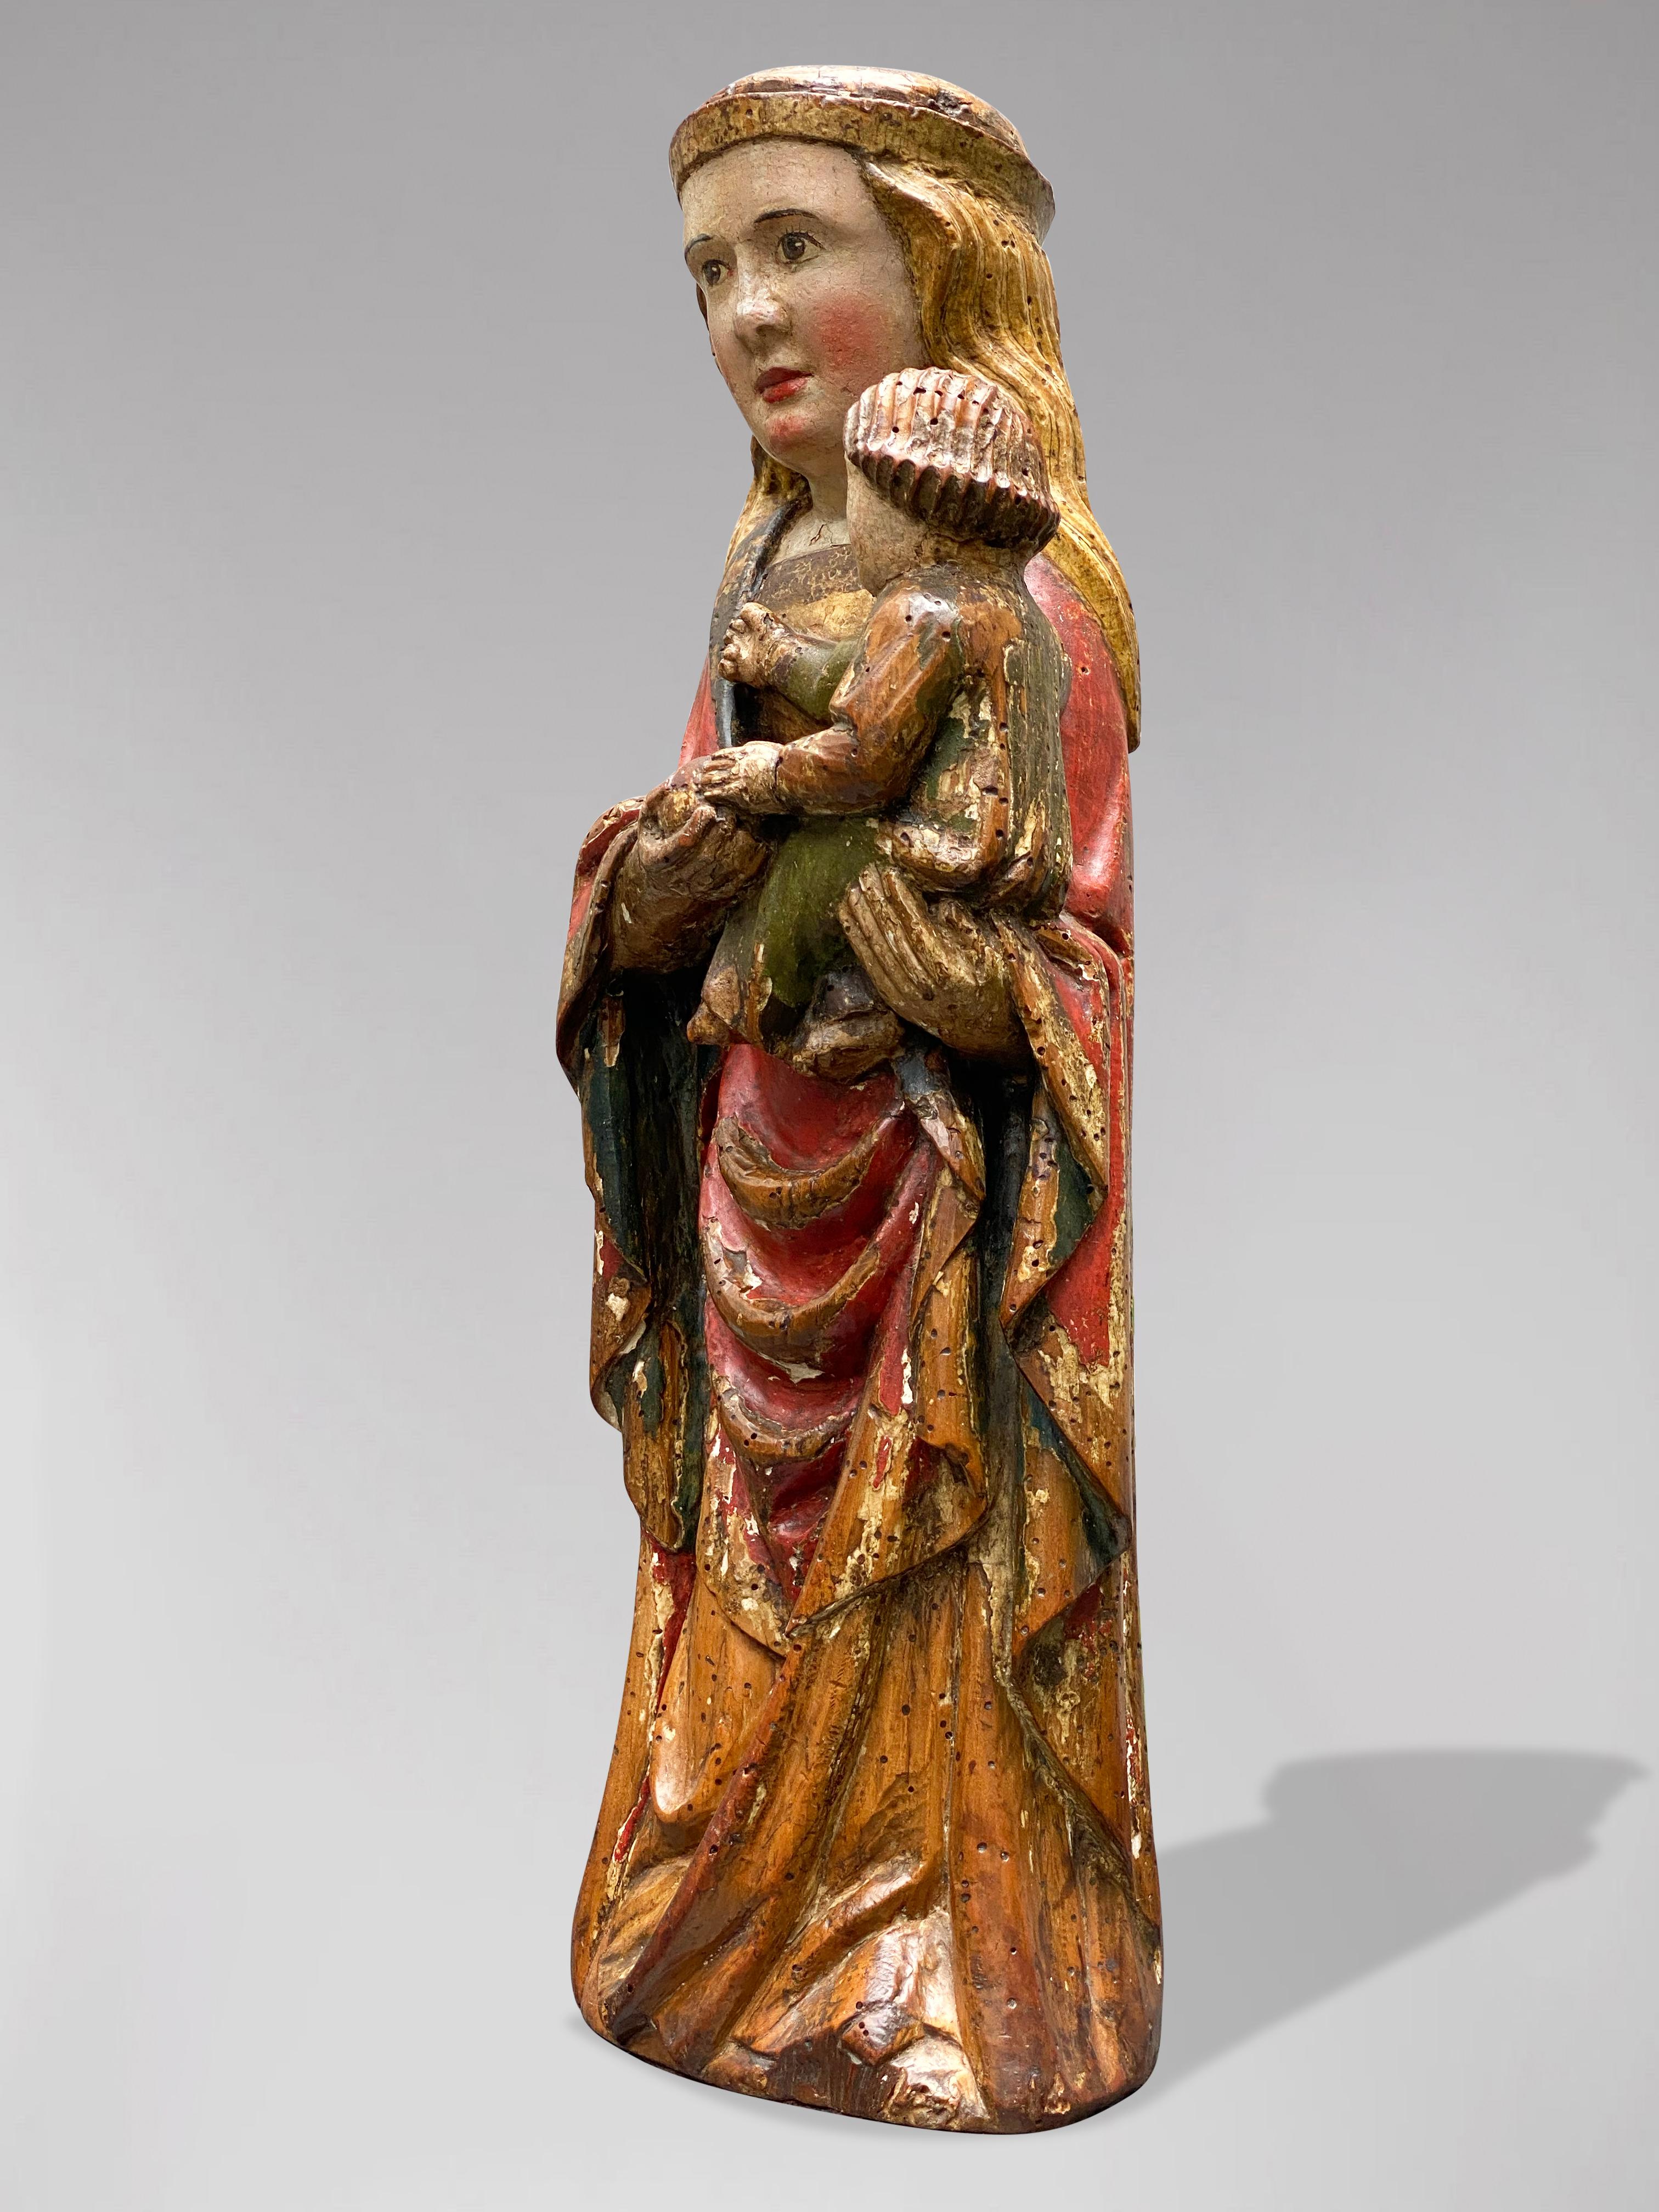 A Spanish Statue of the Virgin Mary with Child Jezus, circa 1600 - Sculpture by Unknown